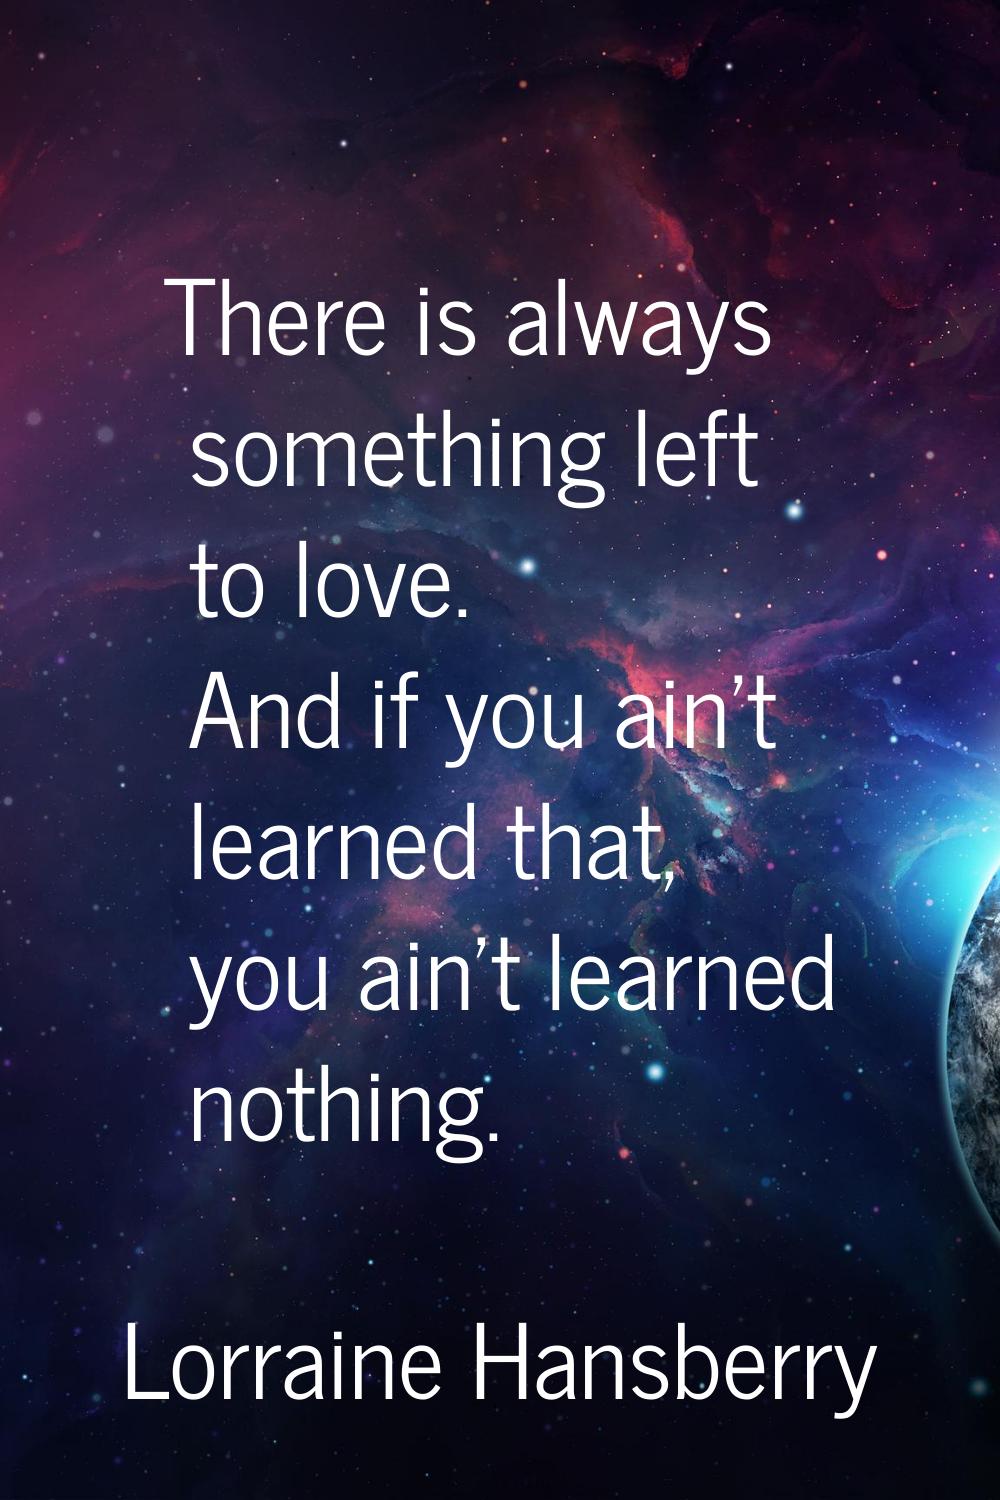 There is always something left to love. And if you ain't learned that, you ain't learned nothing.